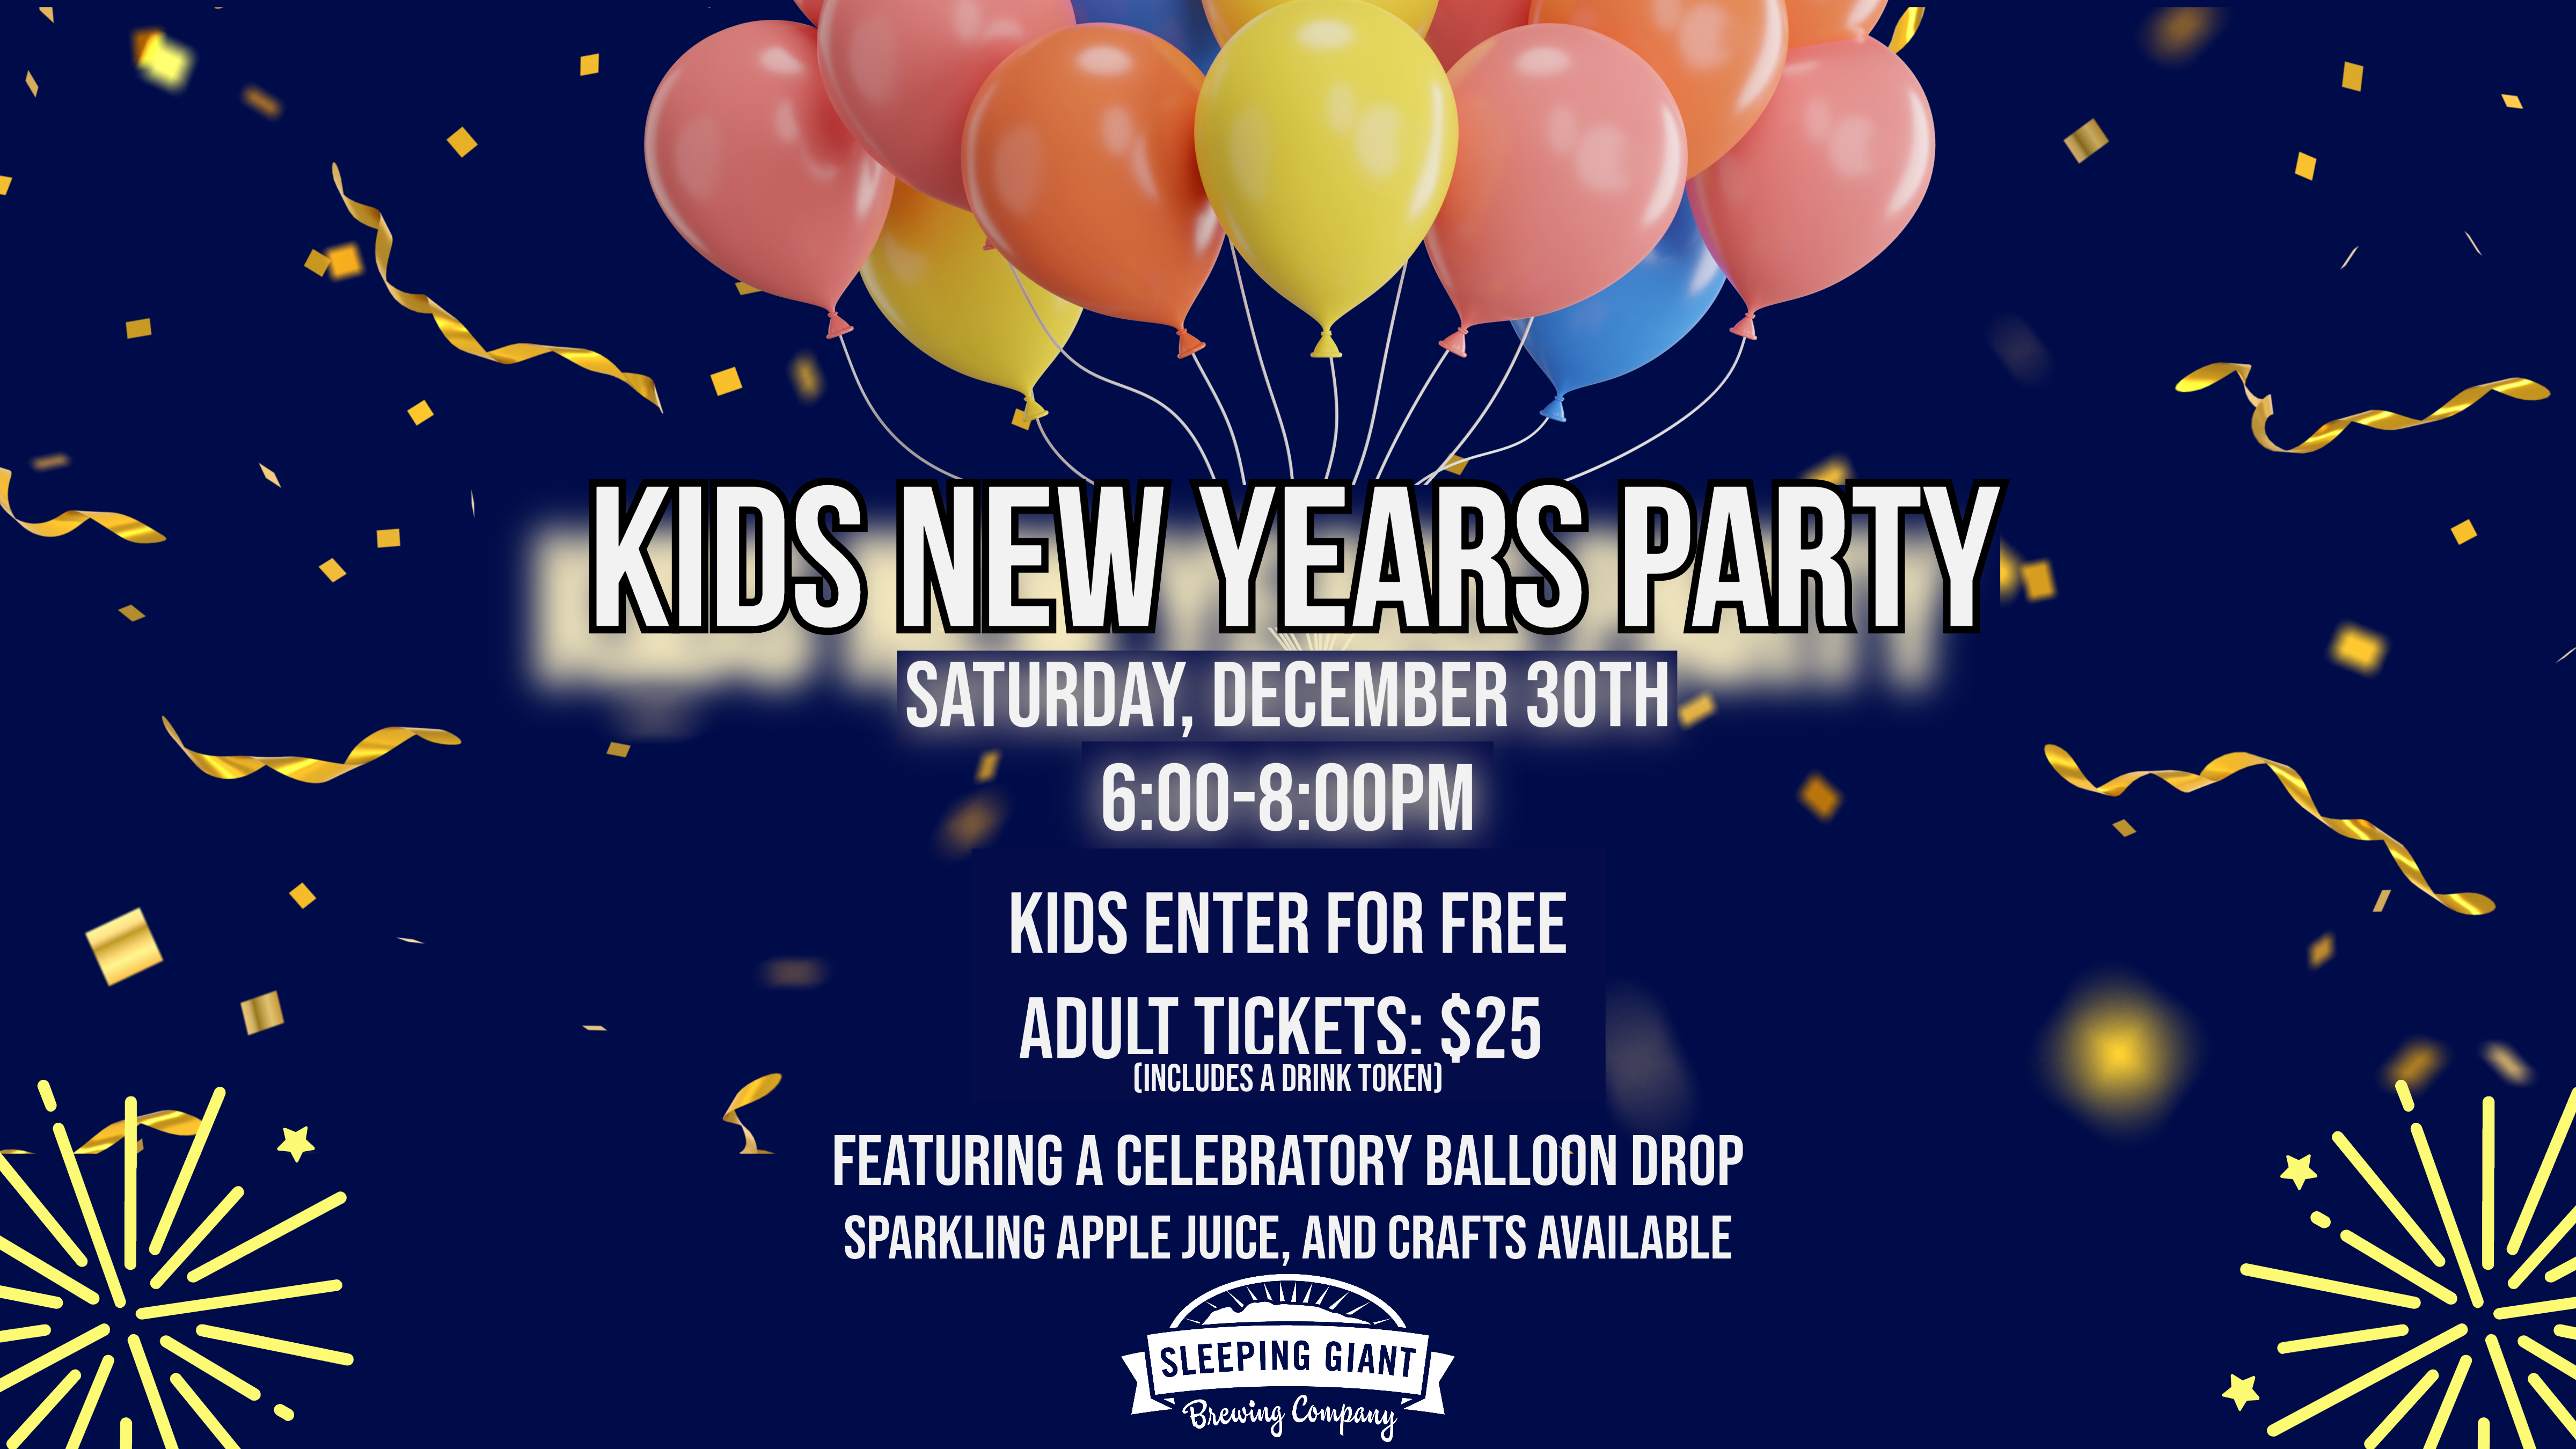 Kids' New Year's Party - Sleeping Giant Brewing Company